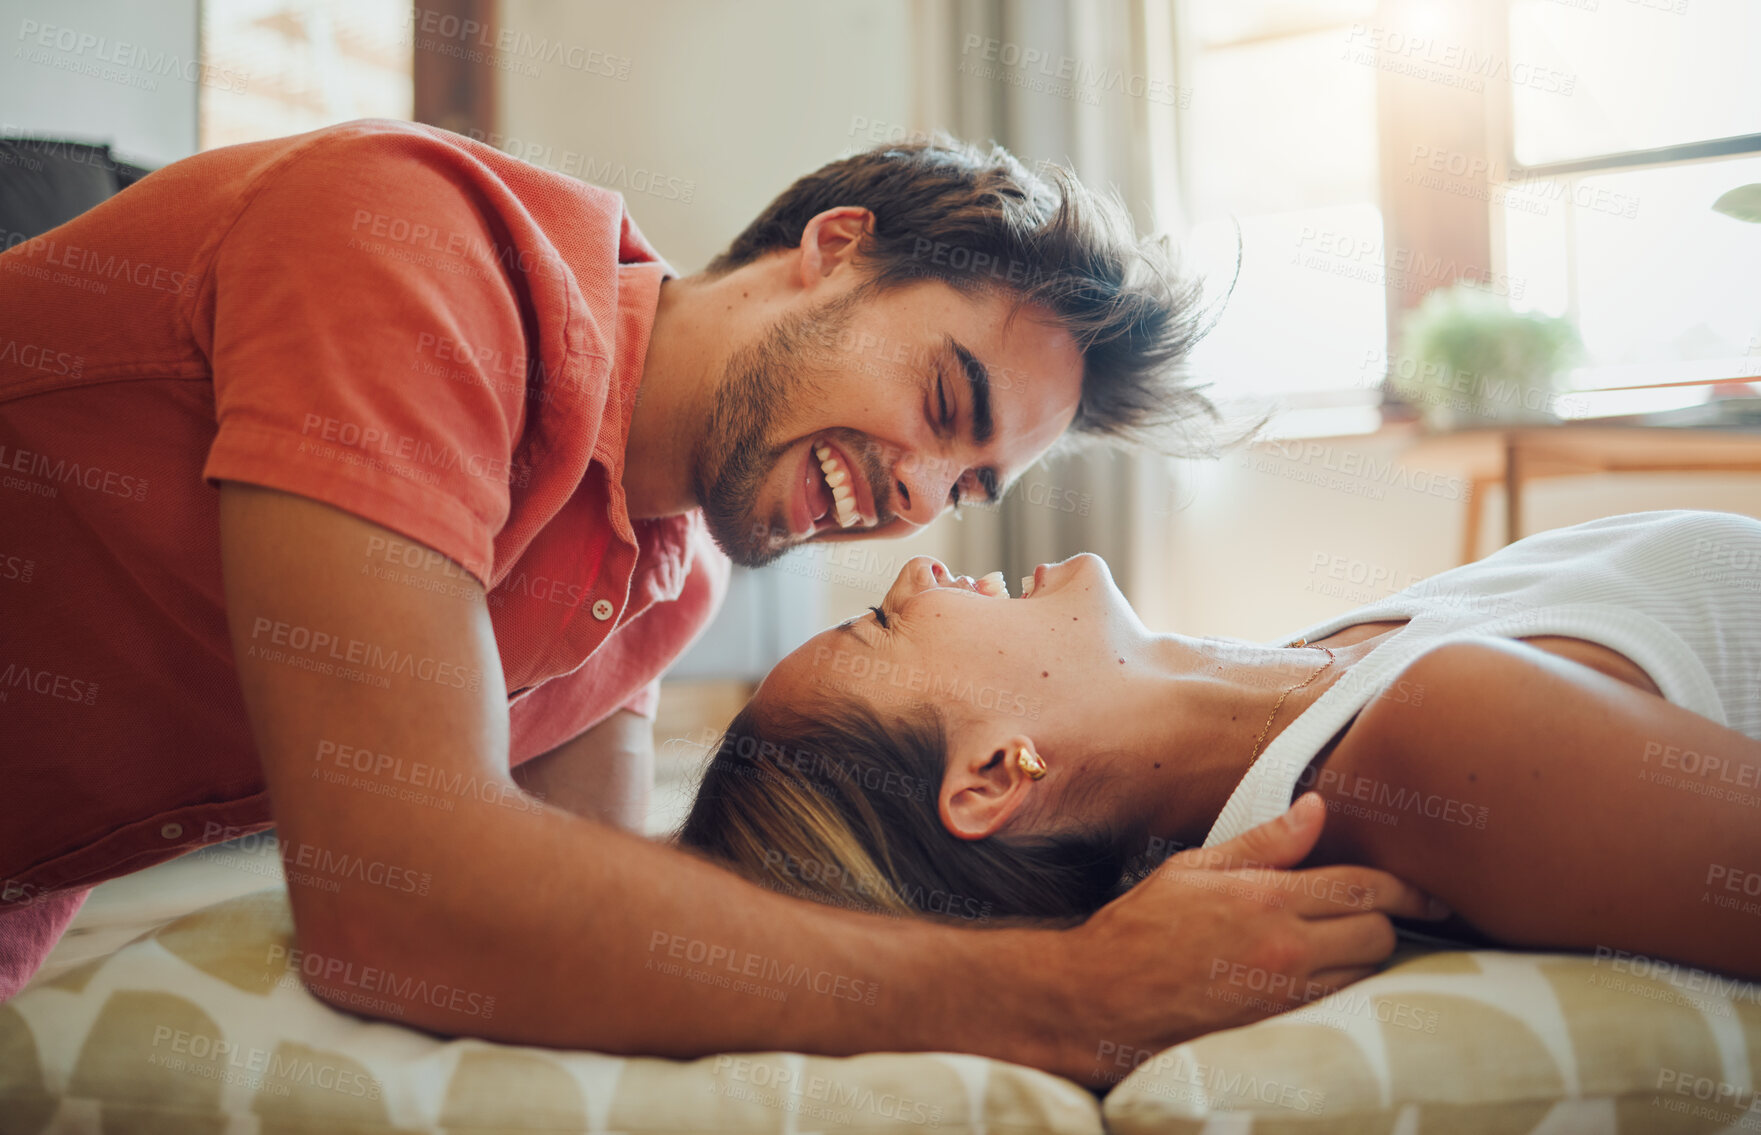 Buy stock photo Happy young woman lying down while her boyfriend leans over her as they laugh together and look into each other eyes. Affectionate couple enjoying romantic intimate moment at home